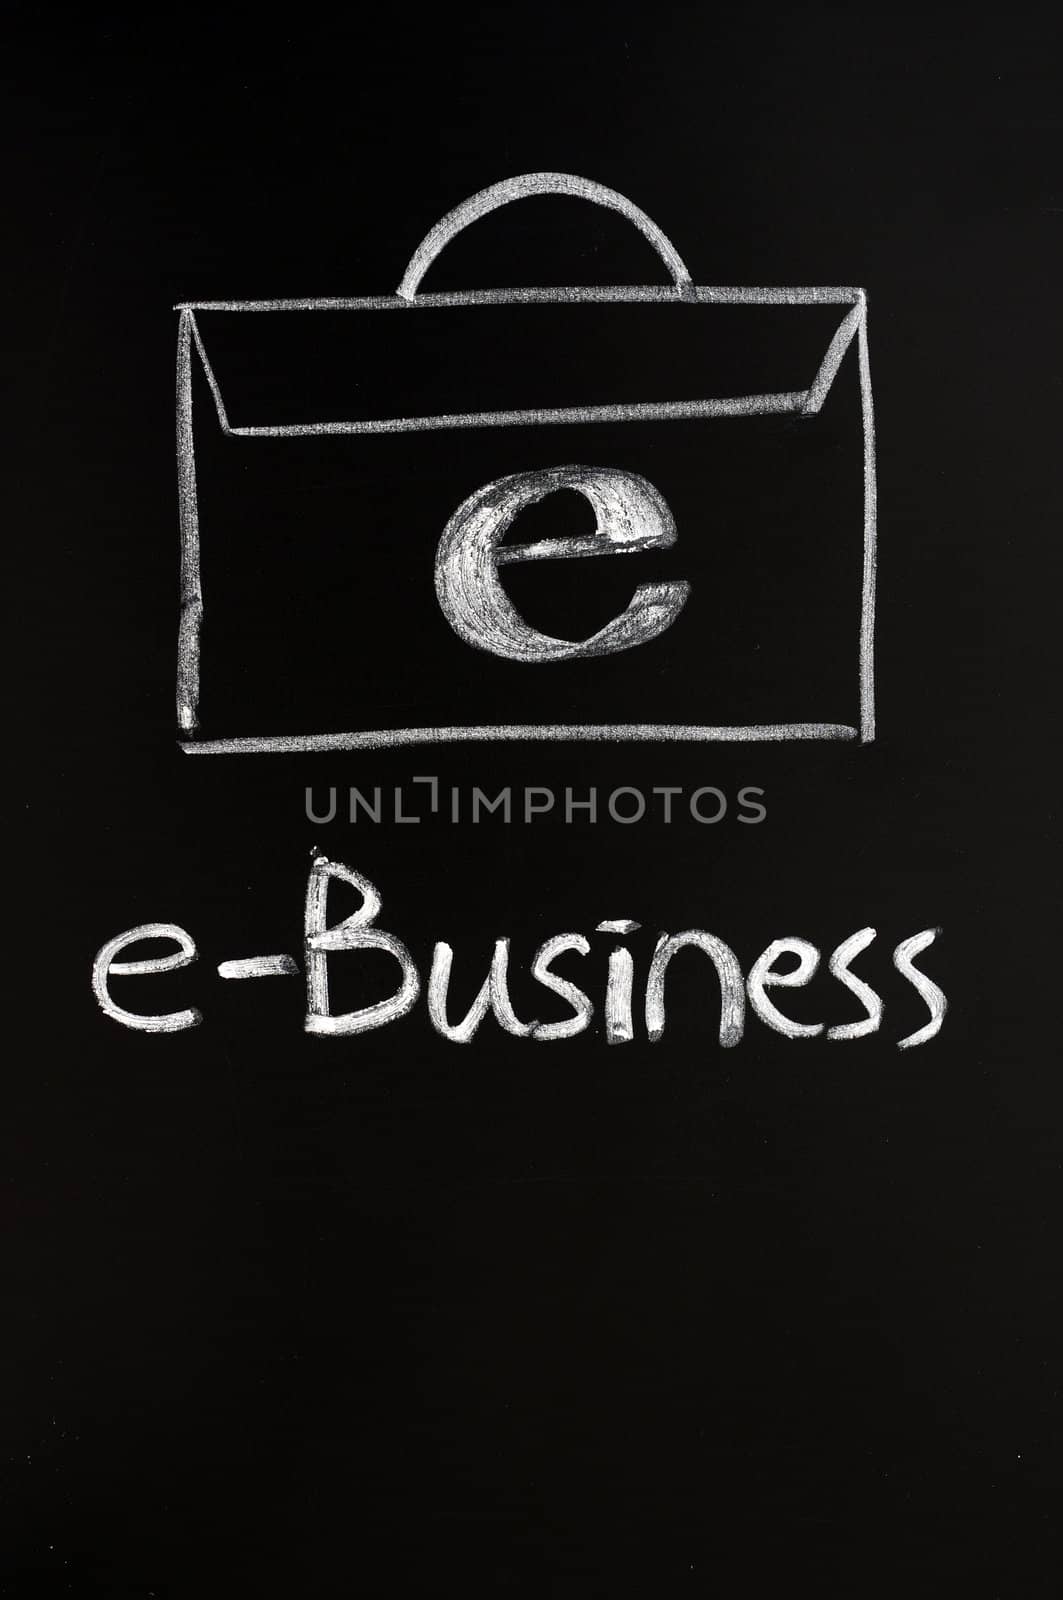 E-business by bbbar